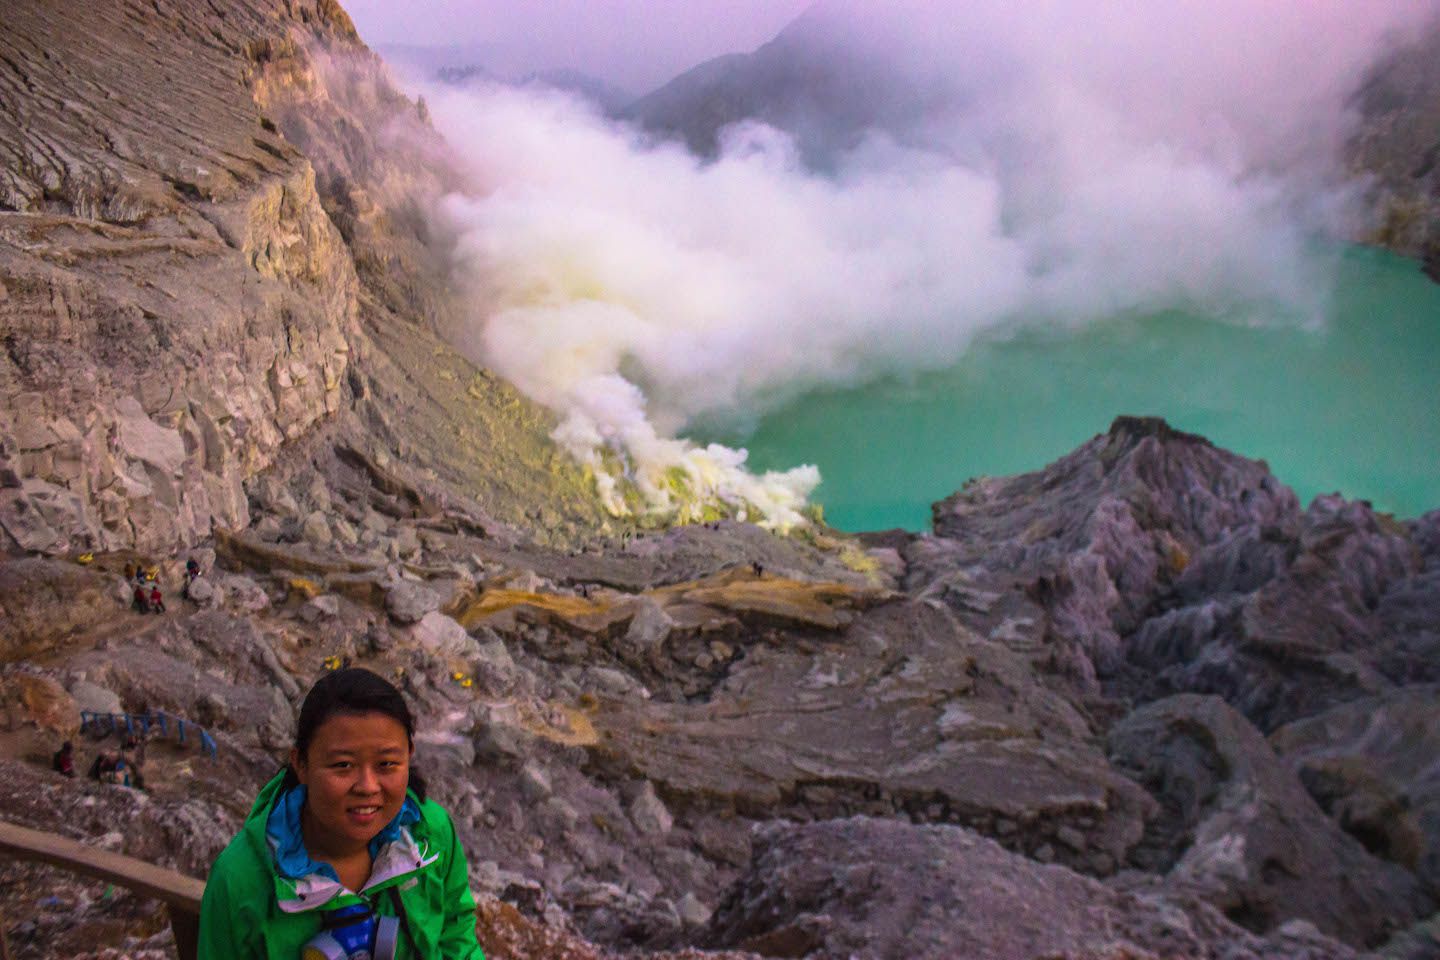 Julie at the crater of Mt. Ijen, Indonesia